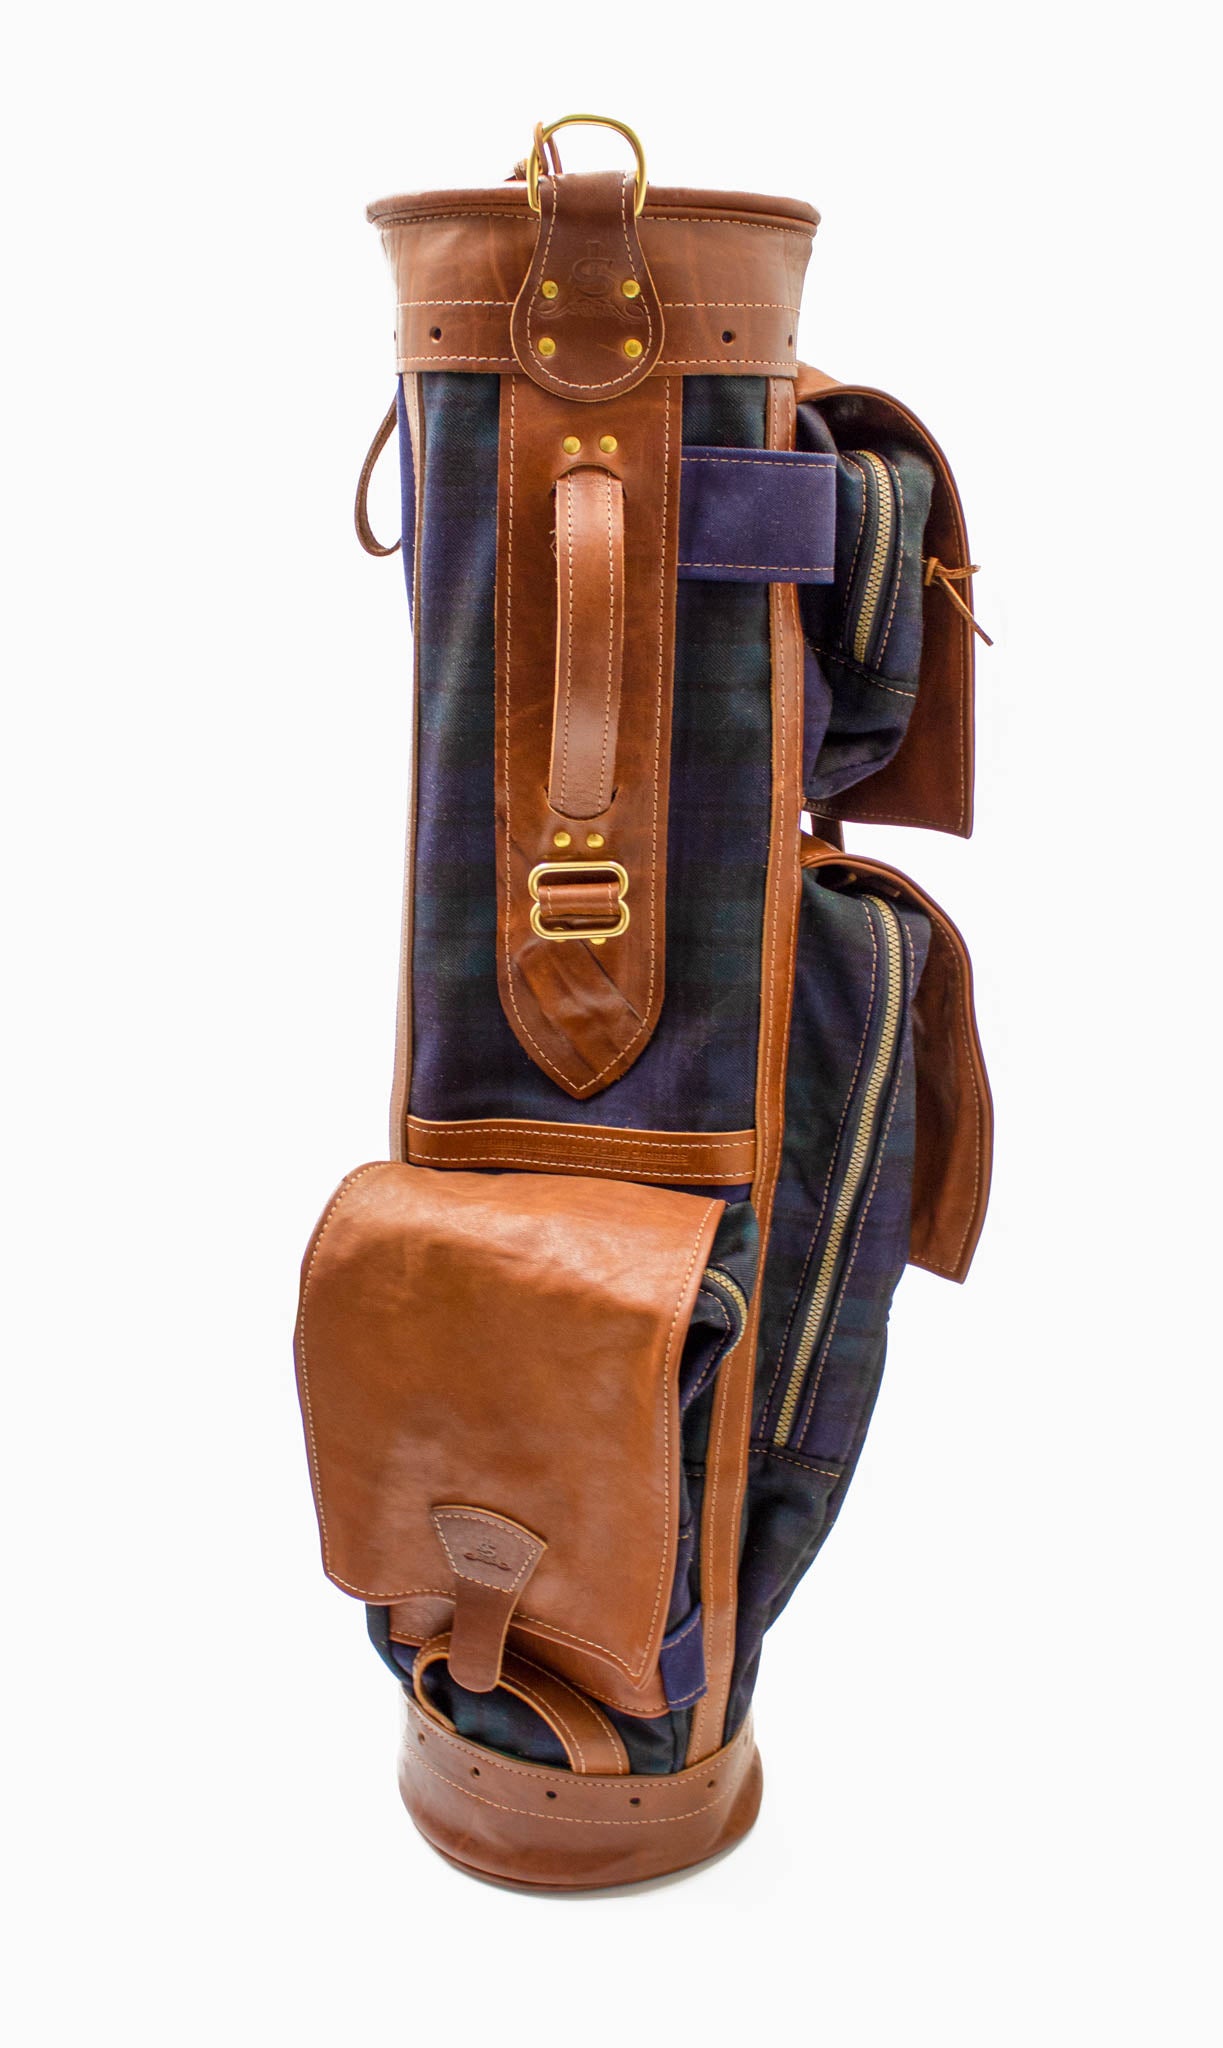 9 golf bags for golfers looking for a style upgrade | Golf Equipment: Clubs,  Balls, Bags | Golf Digest